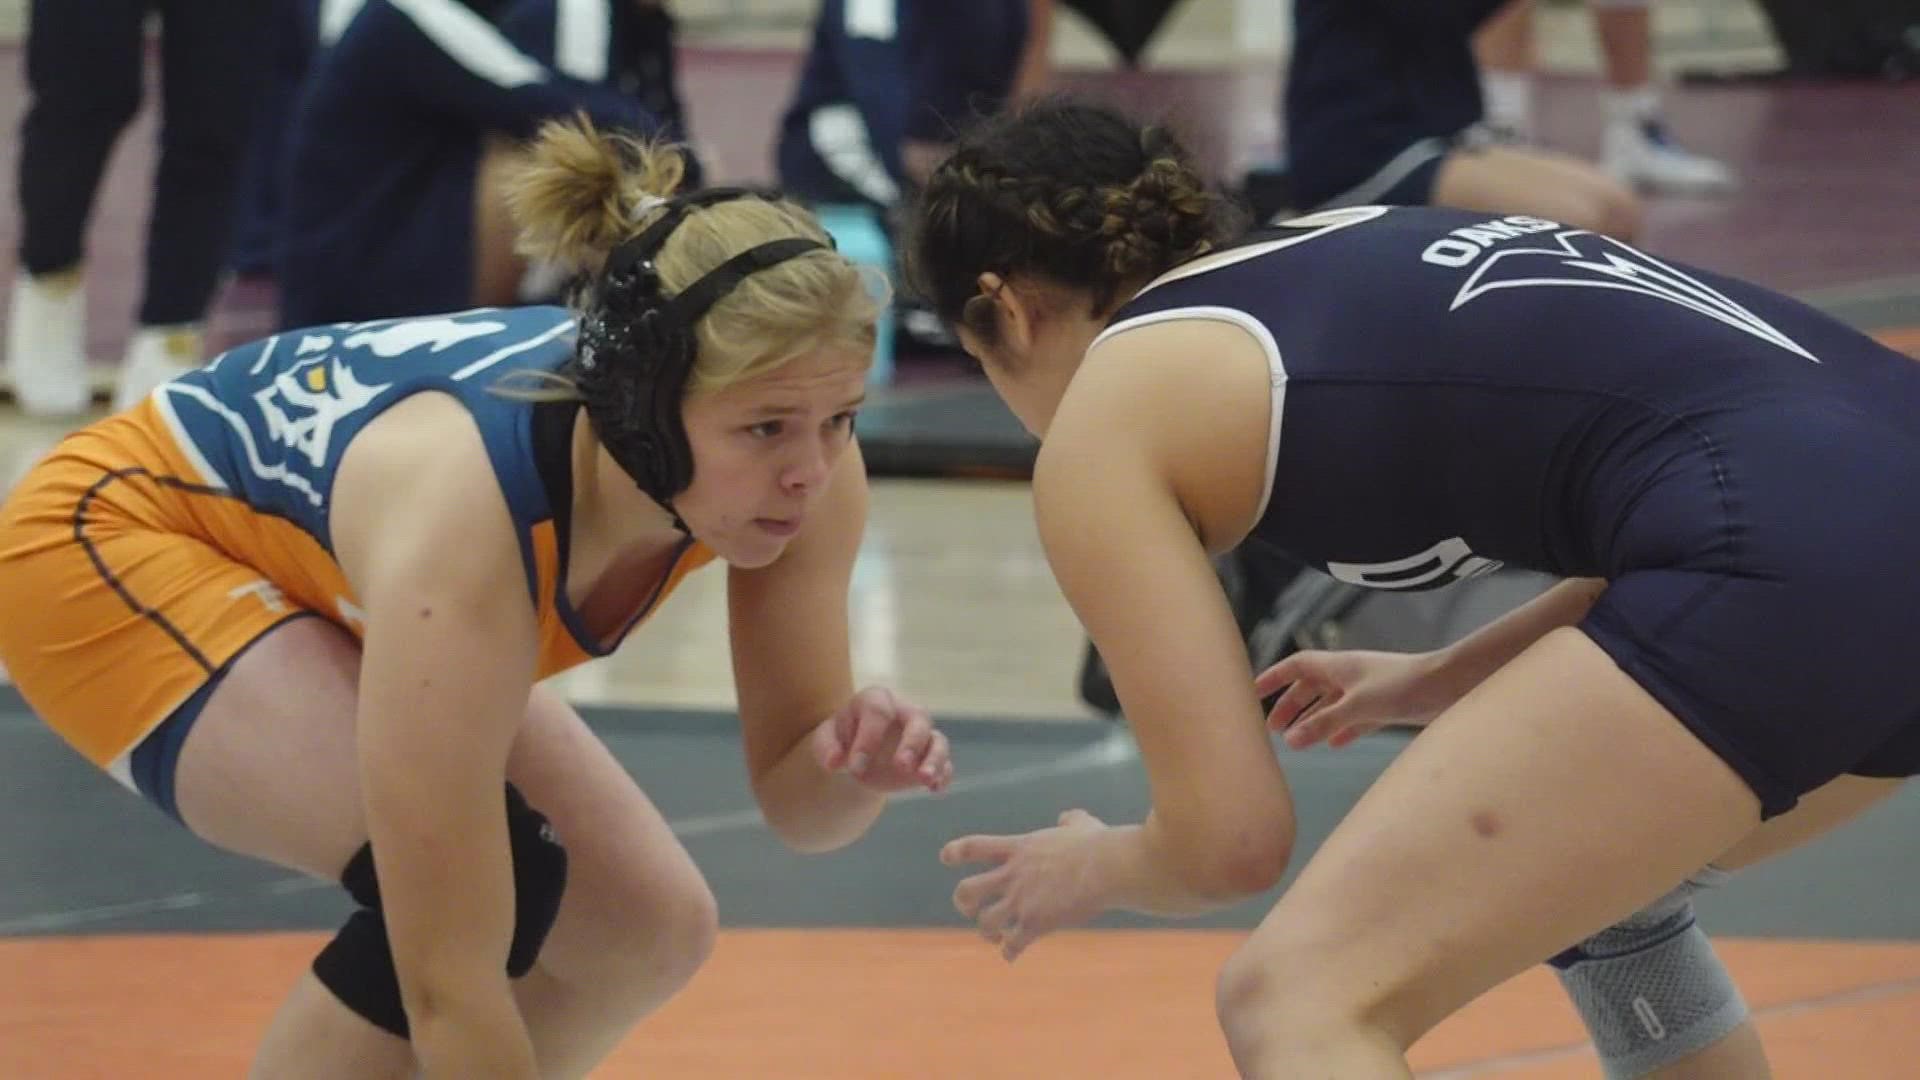 Friday and Saturday the women wrestlers will face off, as Women's West Coast Tournament of Champions director calls it the fastest growing woman's sport.